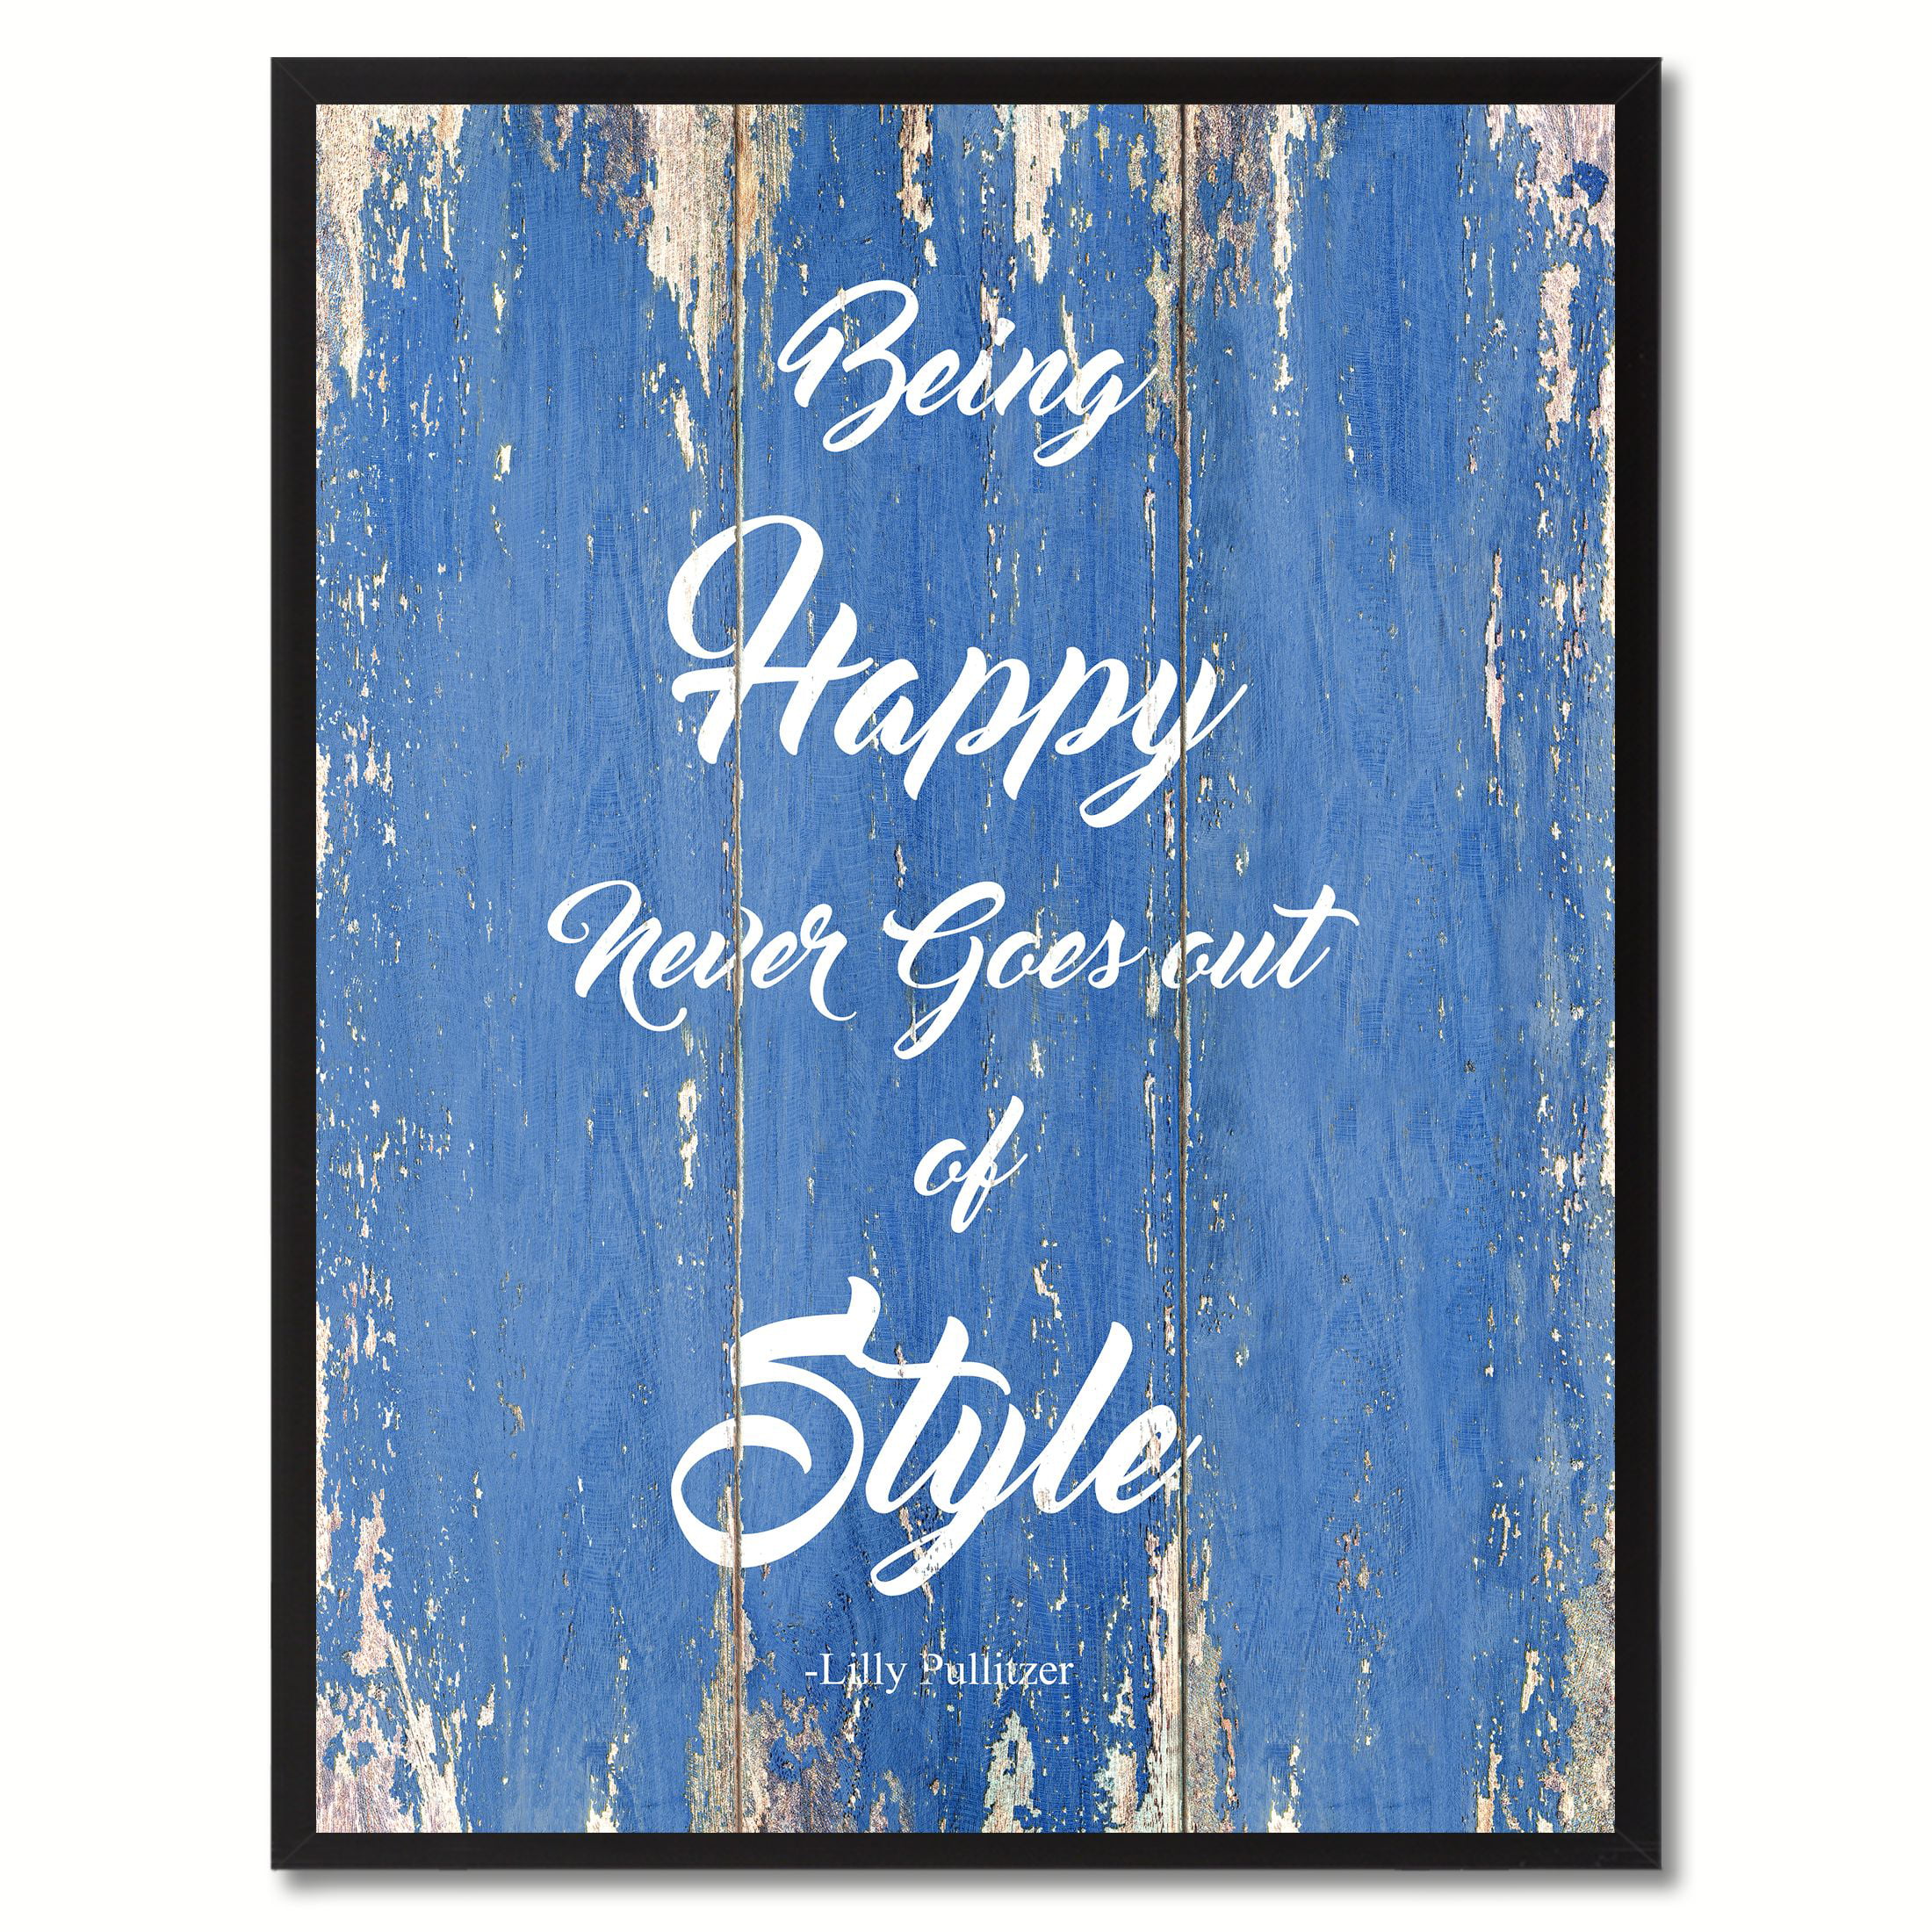 Being Happy Never Goes Out Of Style Lilly Pulitzer Quote Saying Canvas Print Picture Frame Home Decor Wall Art Gift Ideas Walmart Com Walmart Com